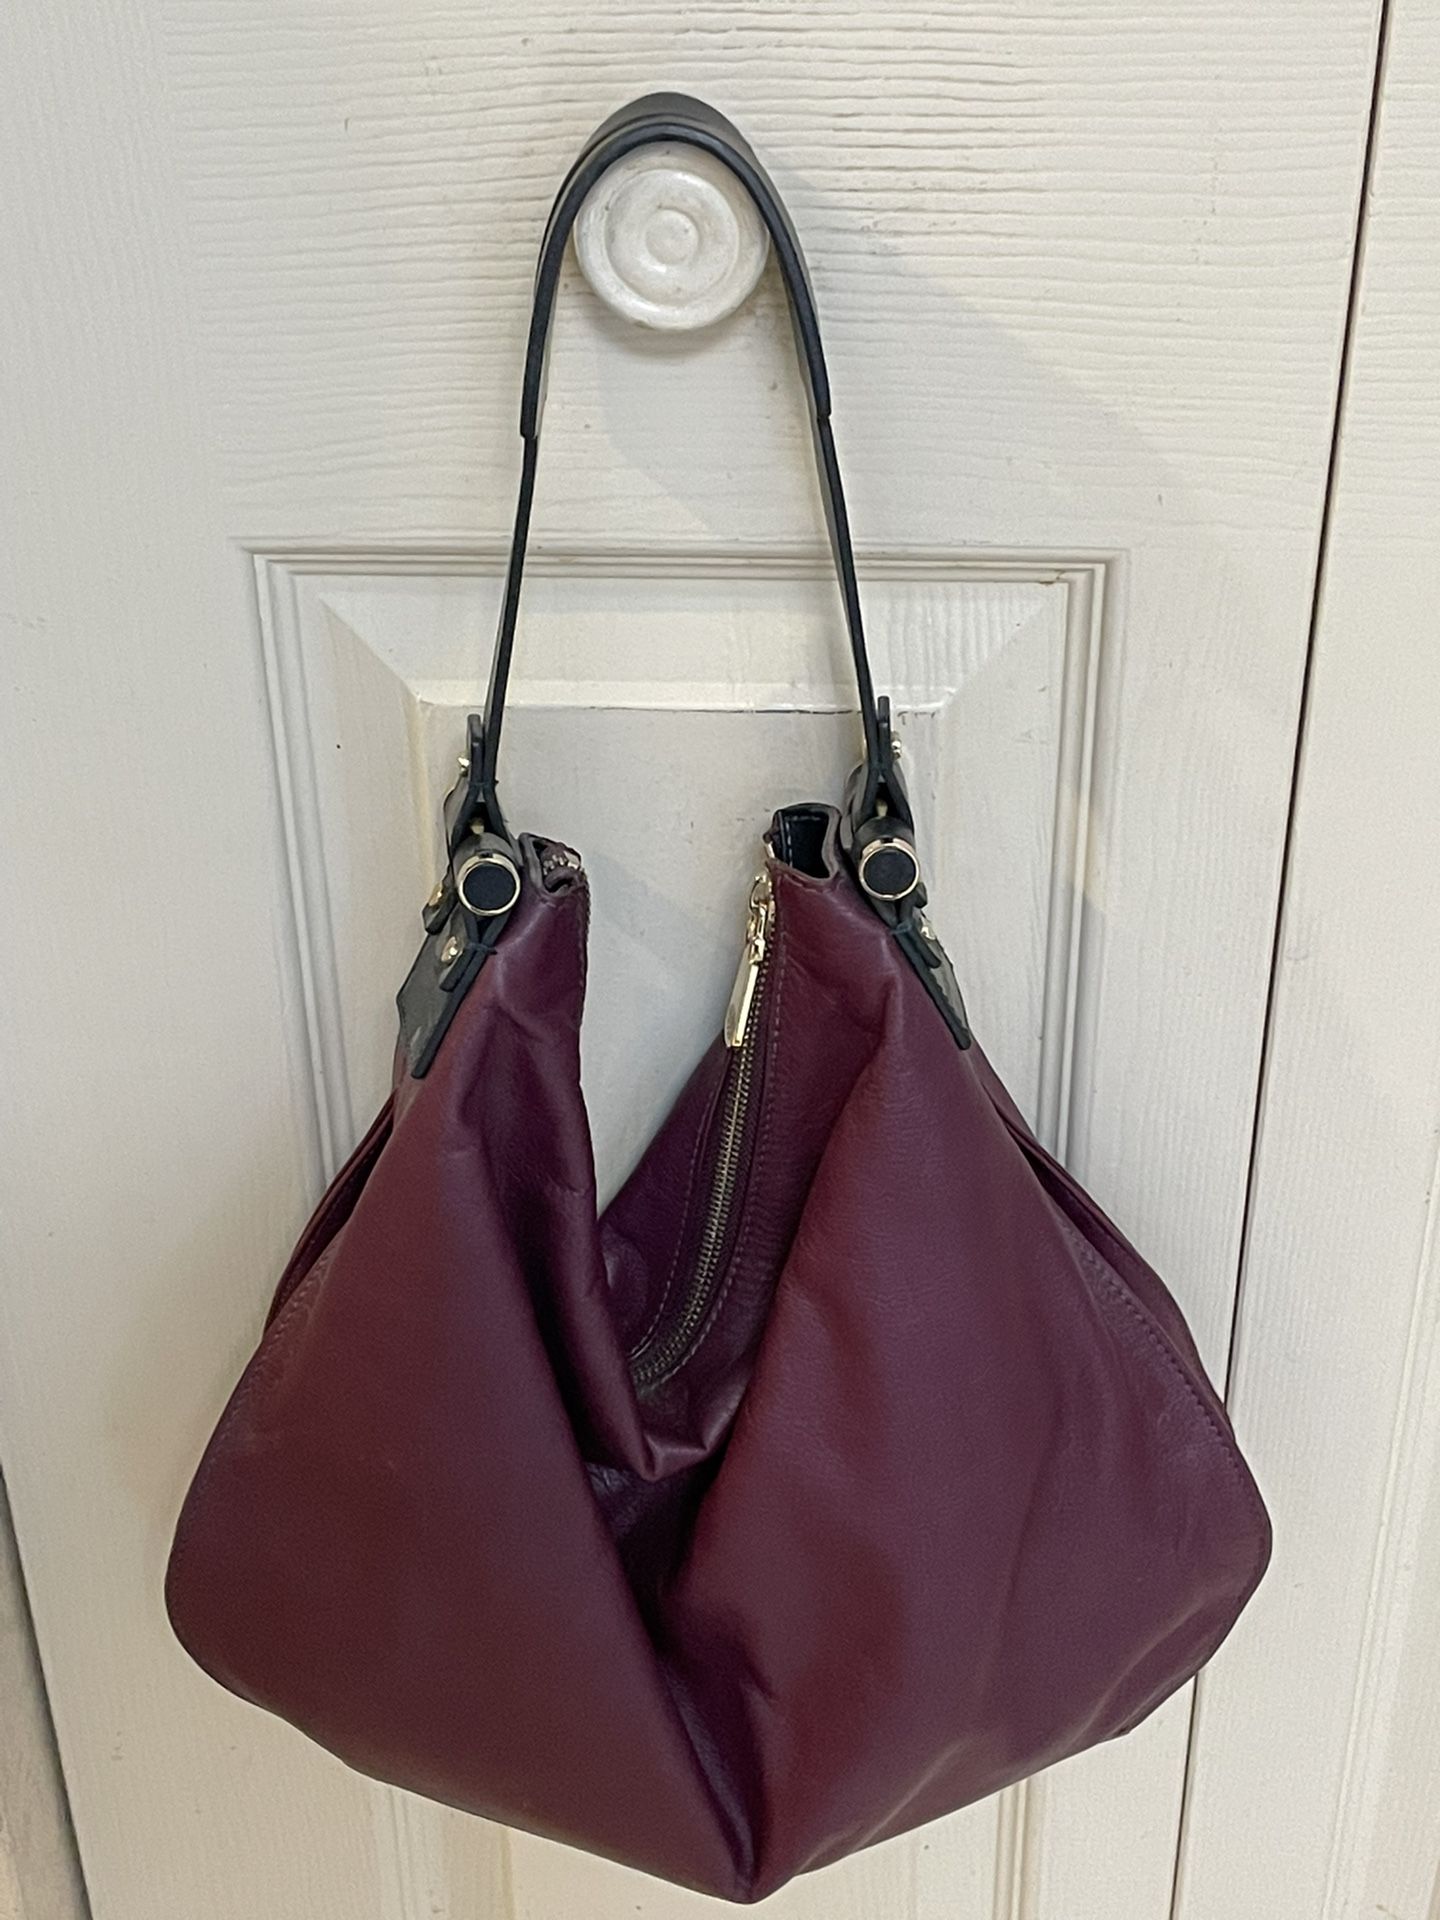 VINCE CAMUTO AUTHENTIC  BURGUNDY GENUINE LEATHER HOBO BAG 